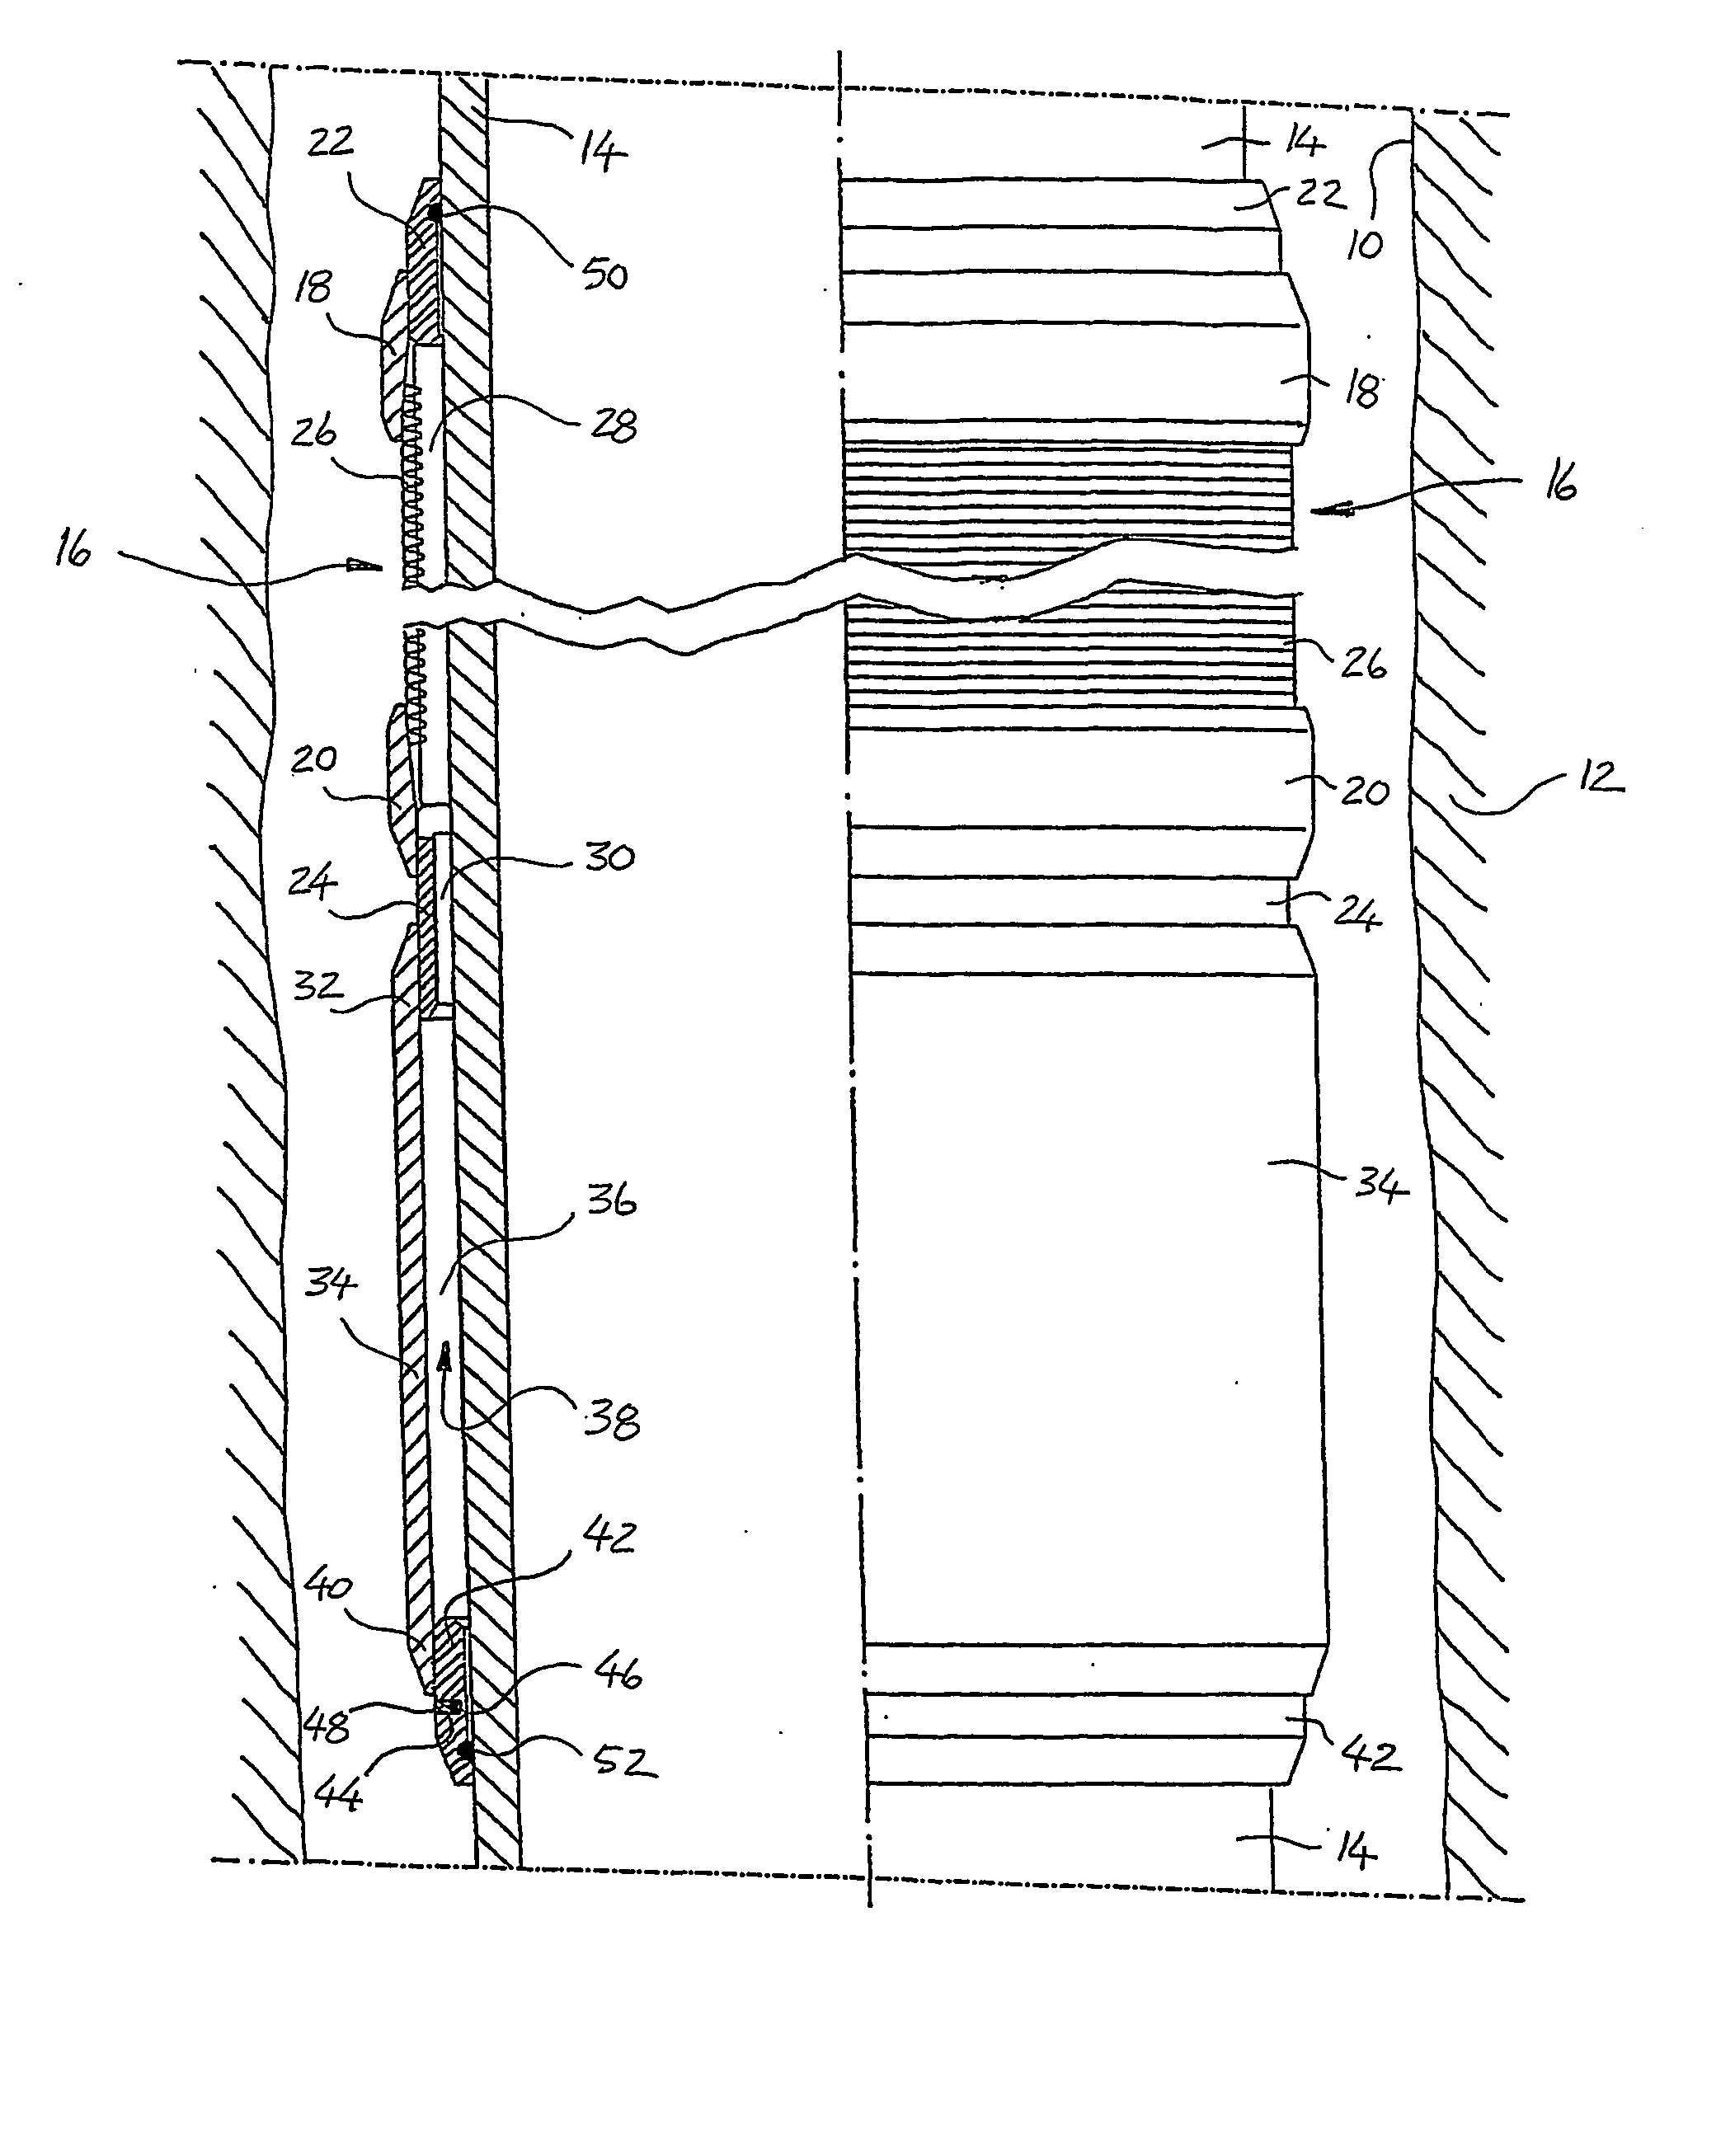 Device and a method for selective control of fluid flow between a well and surrounding rocks